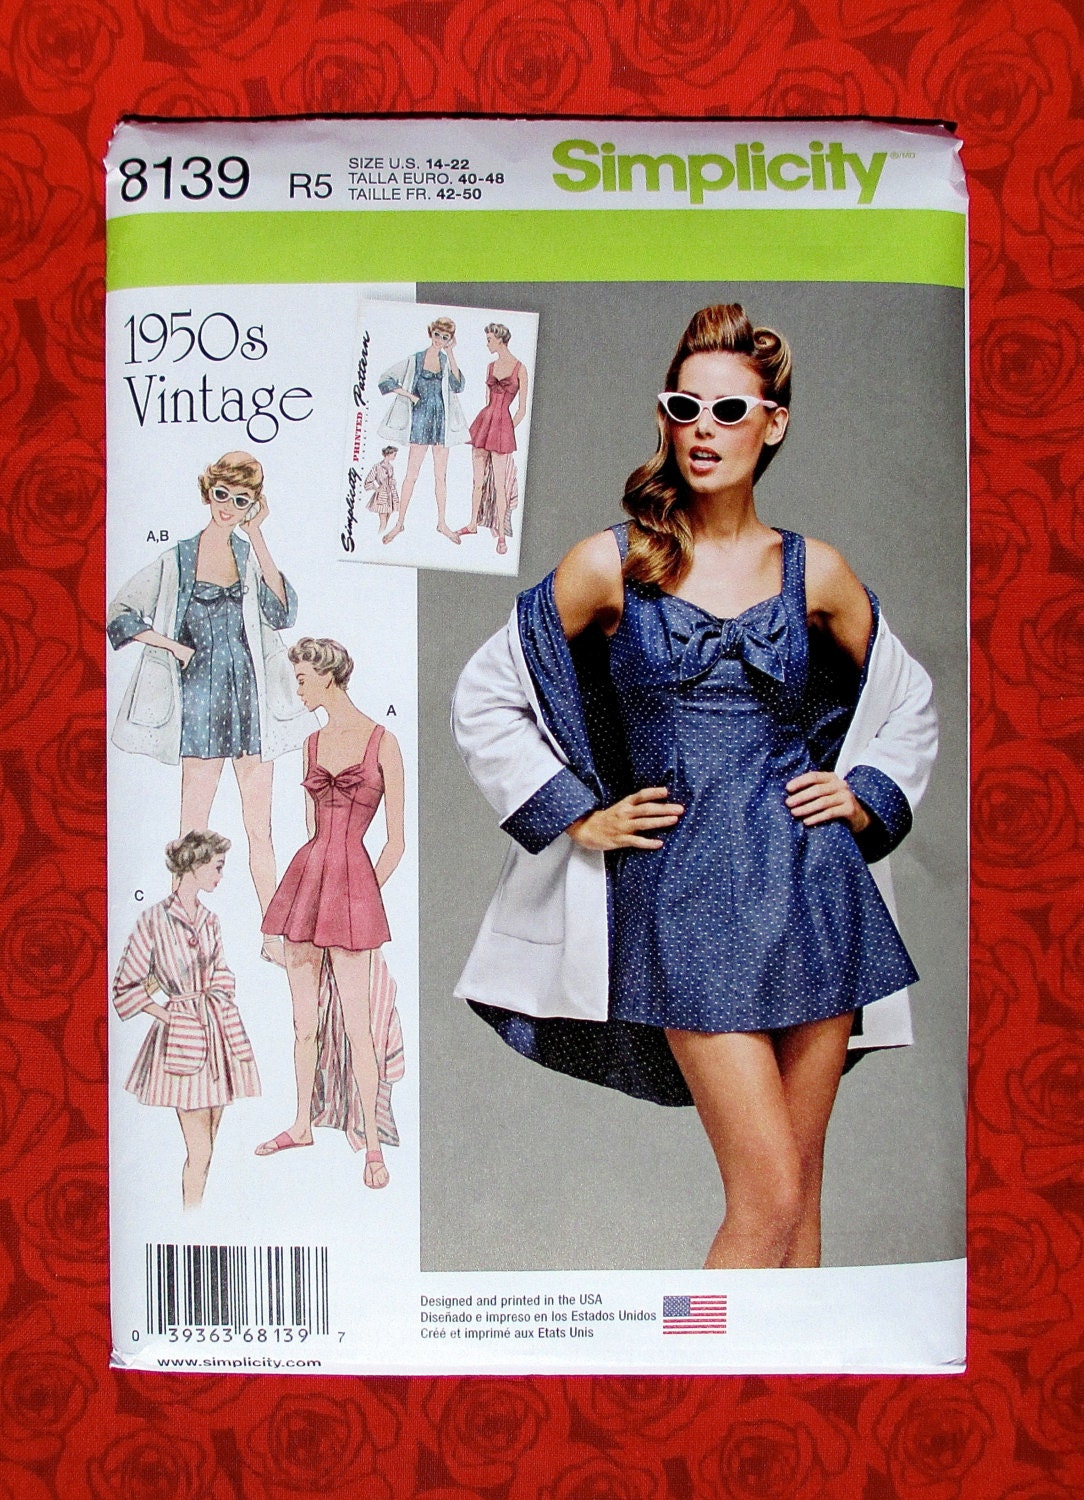  Simplicity 1950's Fashion Women's Vintage Jacket and Dress  Sewing Patterns, Sizes 6-14 : Arts, Crafts & Sewing